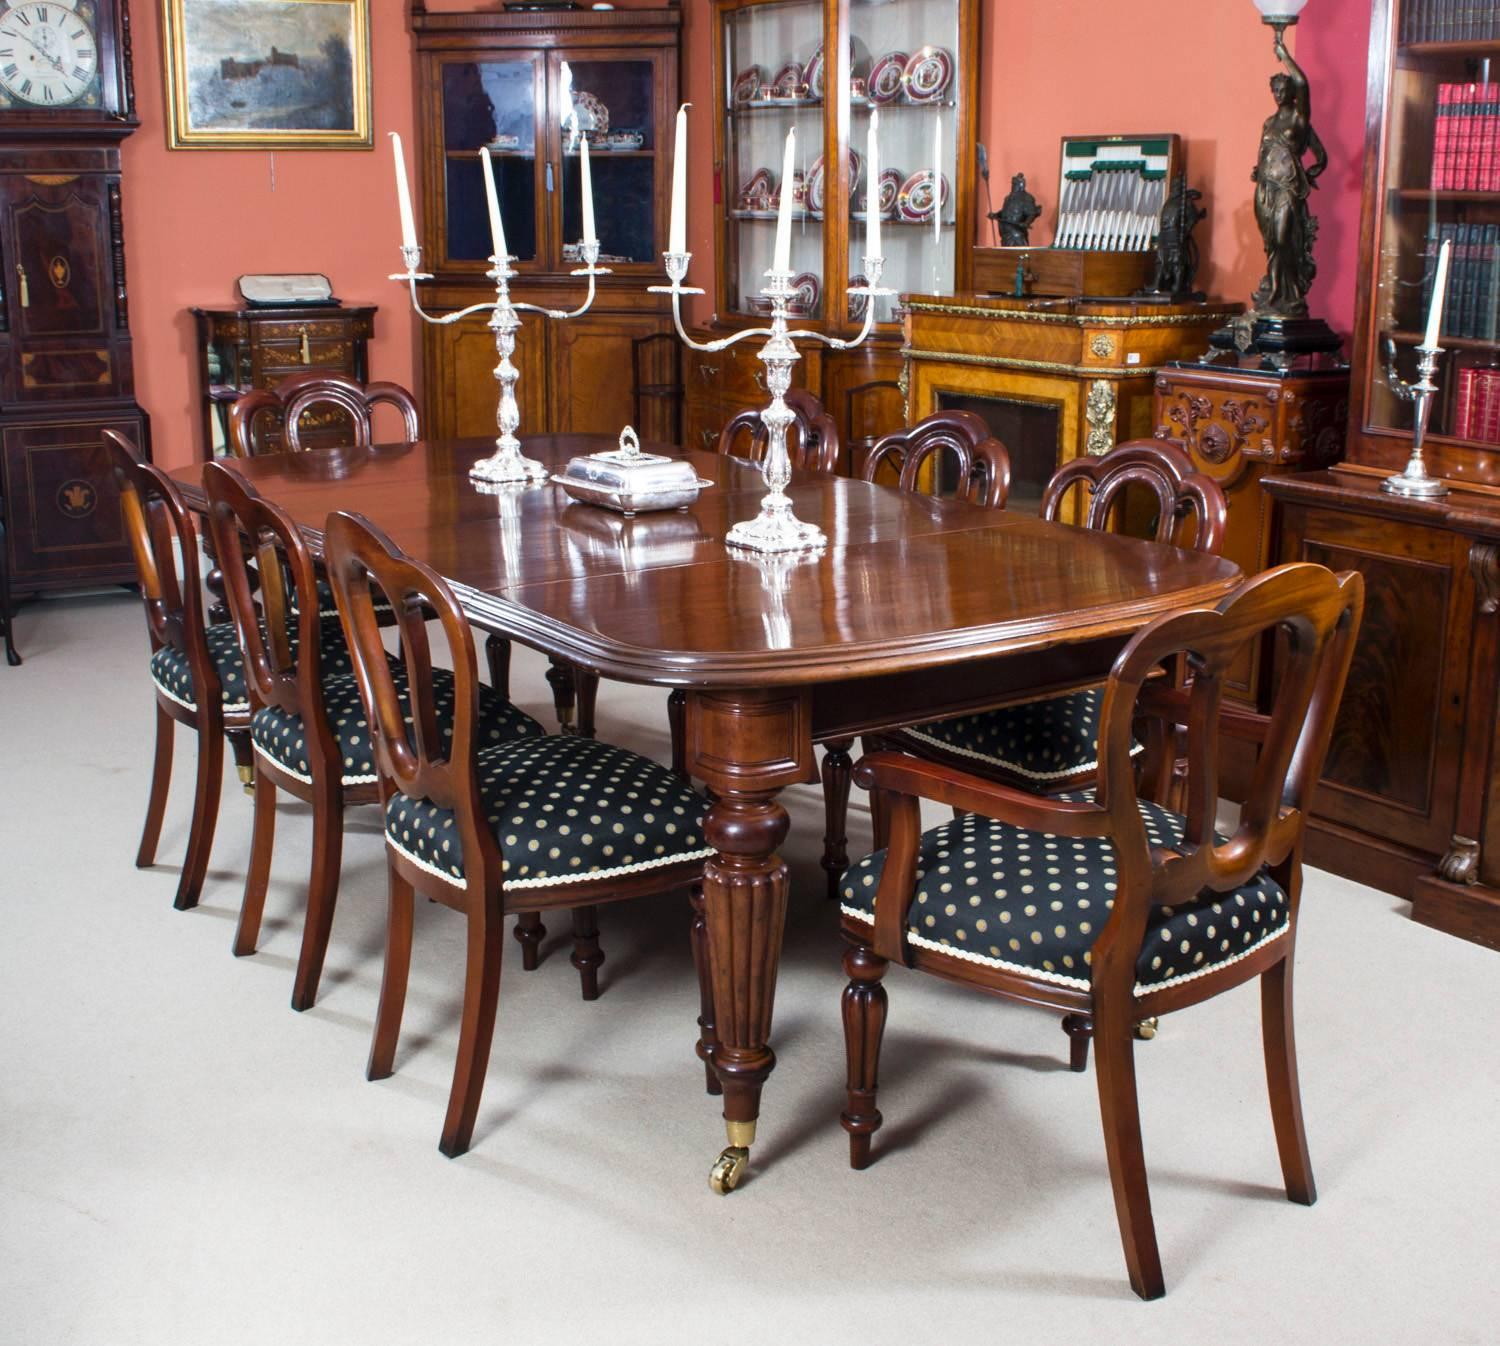 This is a beautiful antique dining set comprising a Victorian D-end mahogany dining table, circa 1850 in date and a set of eight English antique Regency dining chairs, circa 1820 in date. 

This amazing table has two original leaves, can sit eight